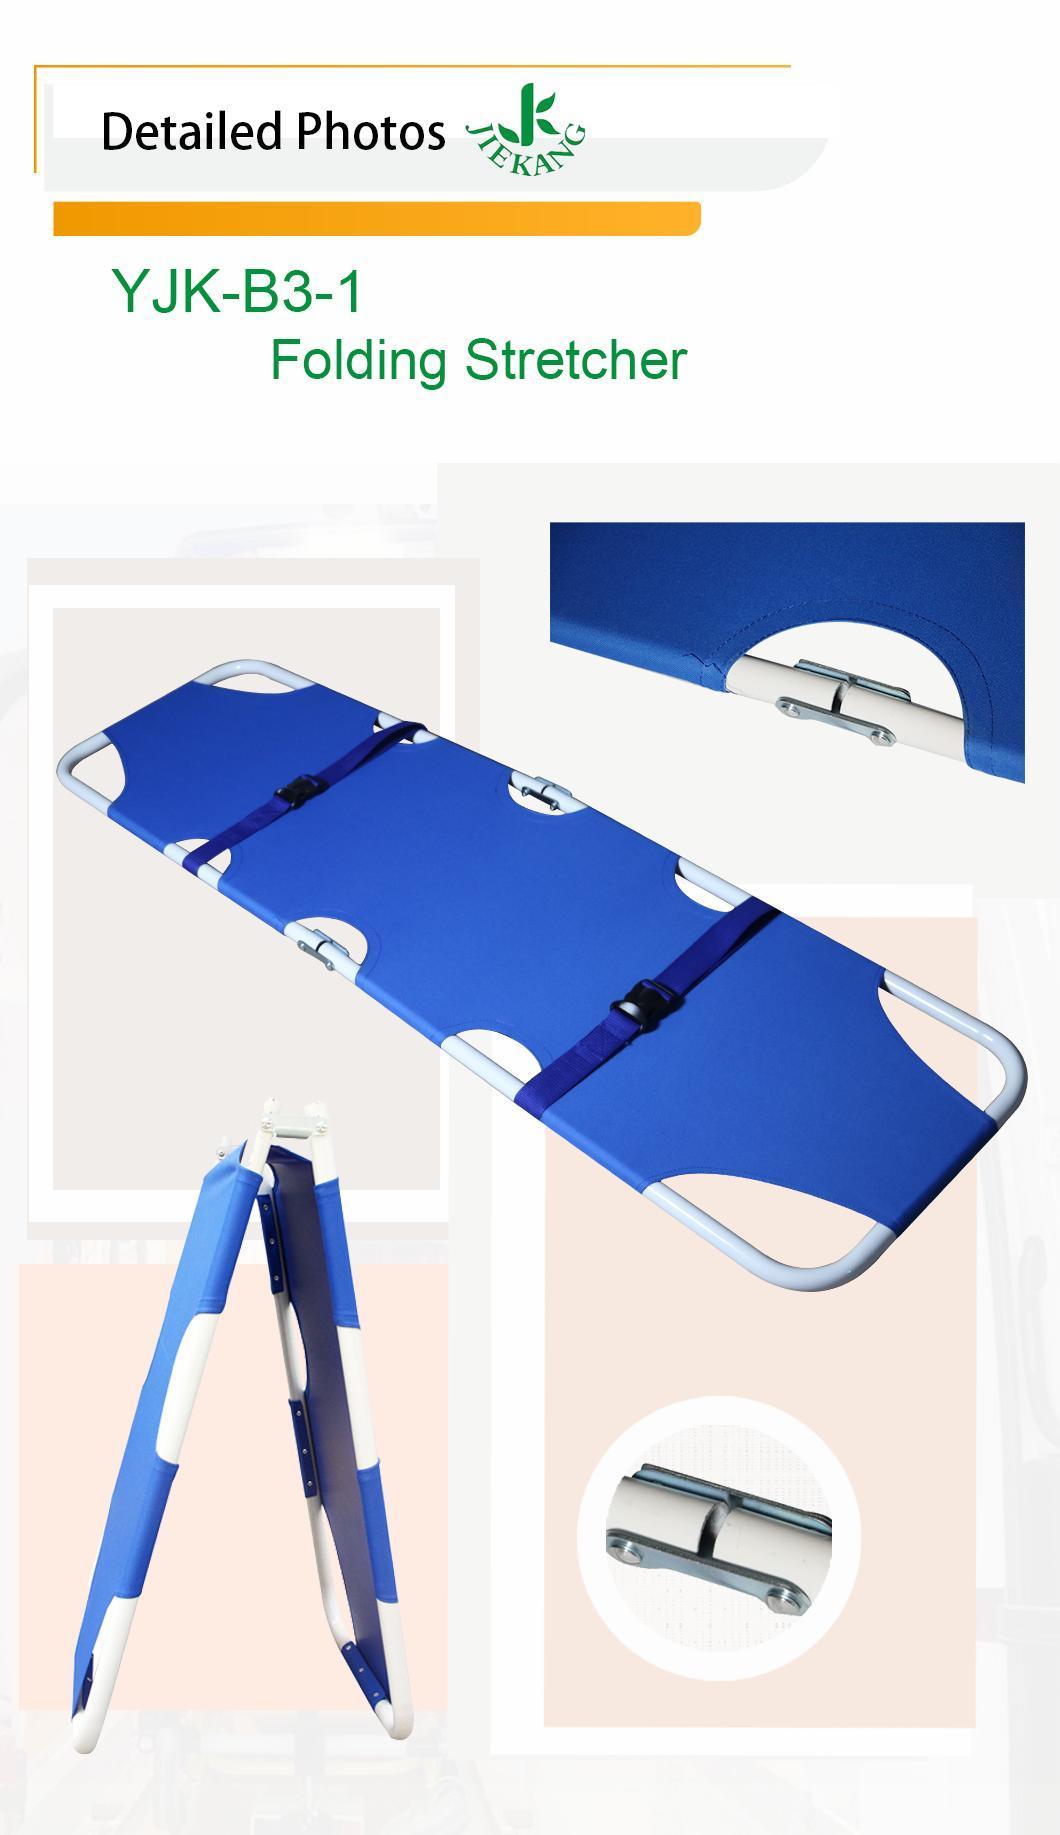 Cheap Light Weight Good Quality Portable Paramedic Fold out Stretcher